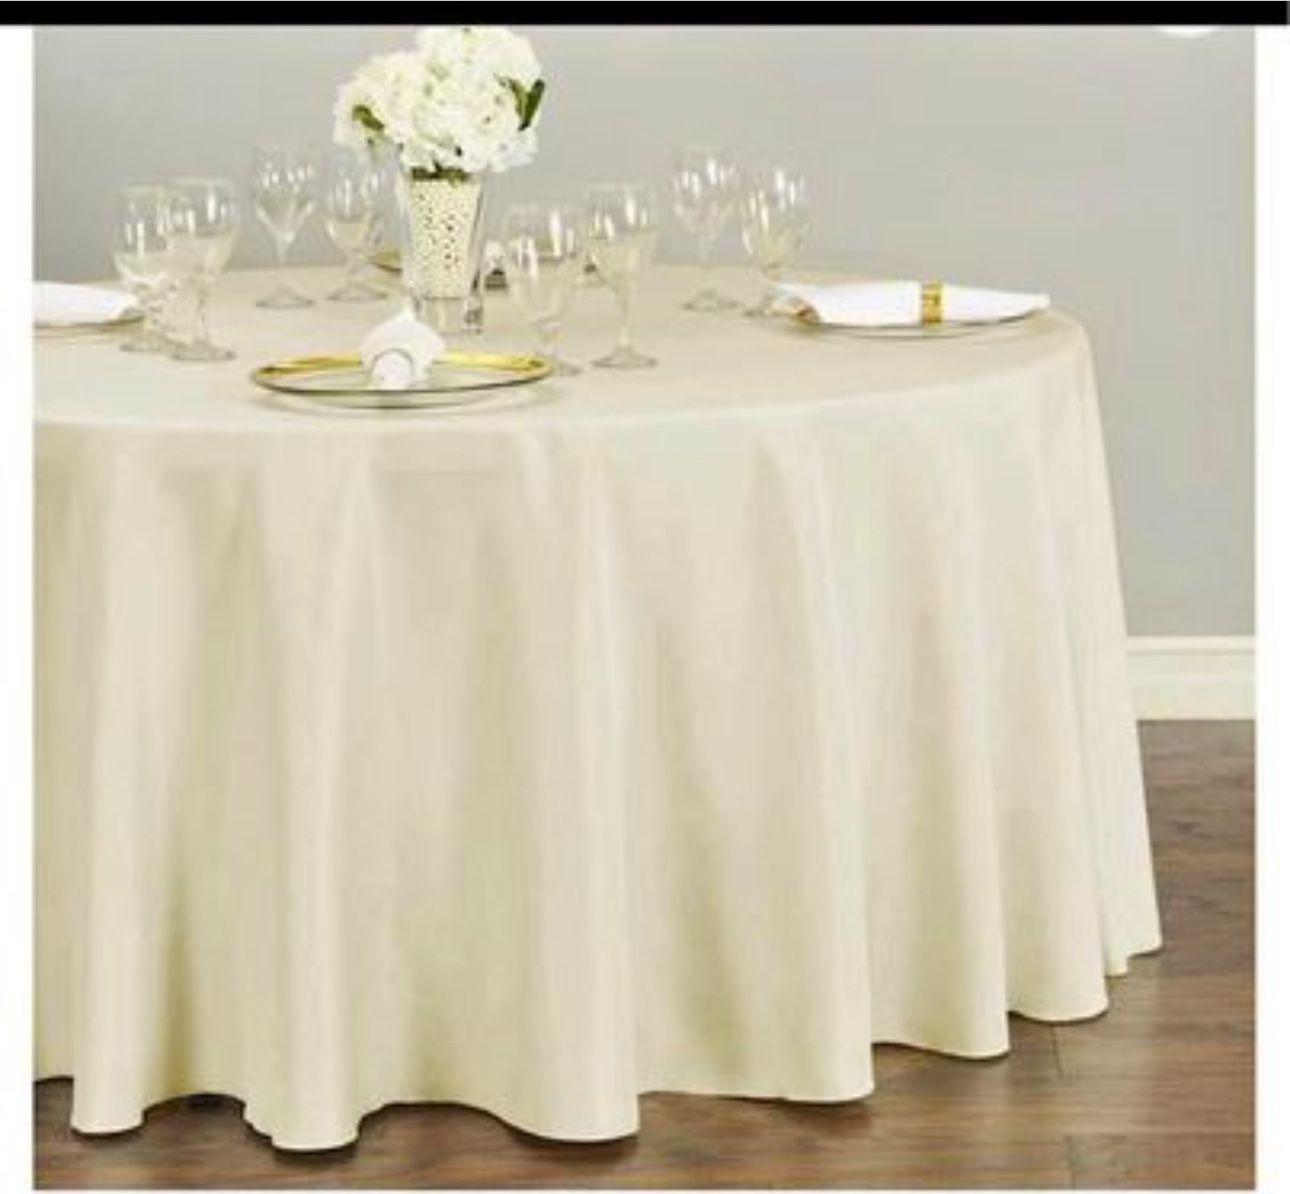 15 Round Ivory Tablecloths $5